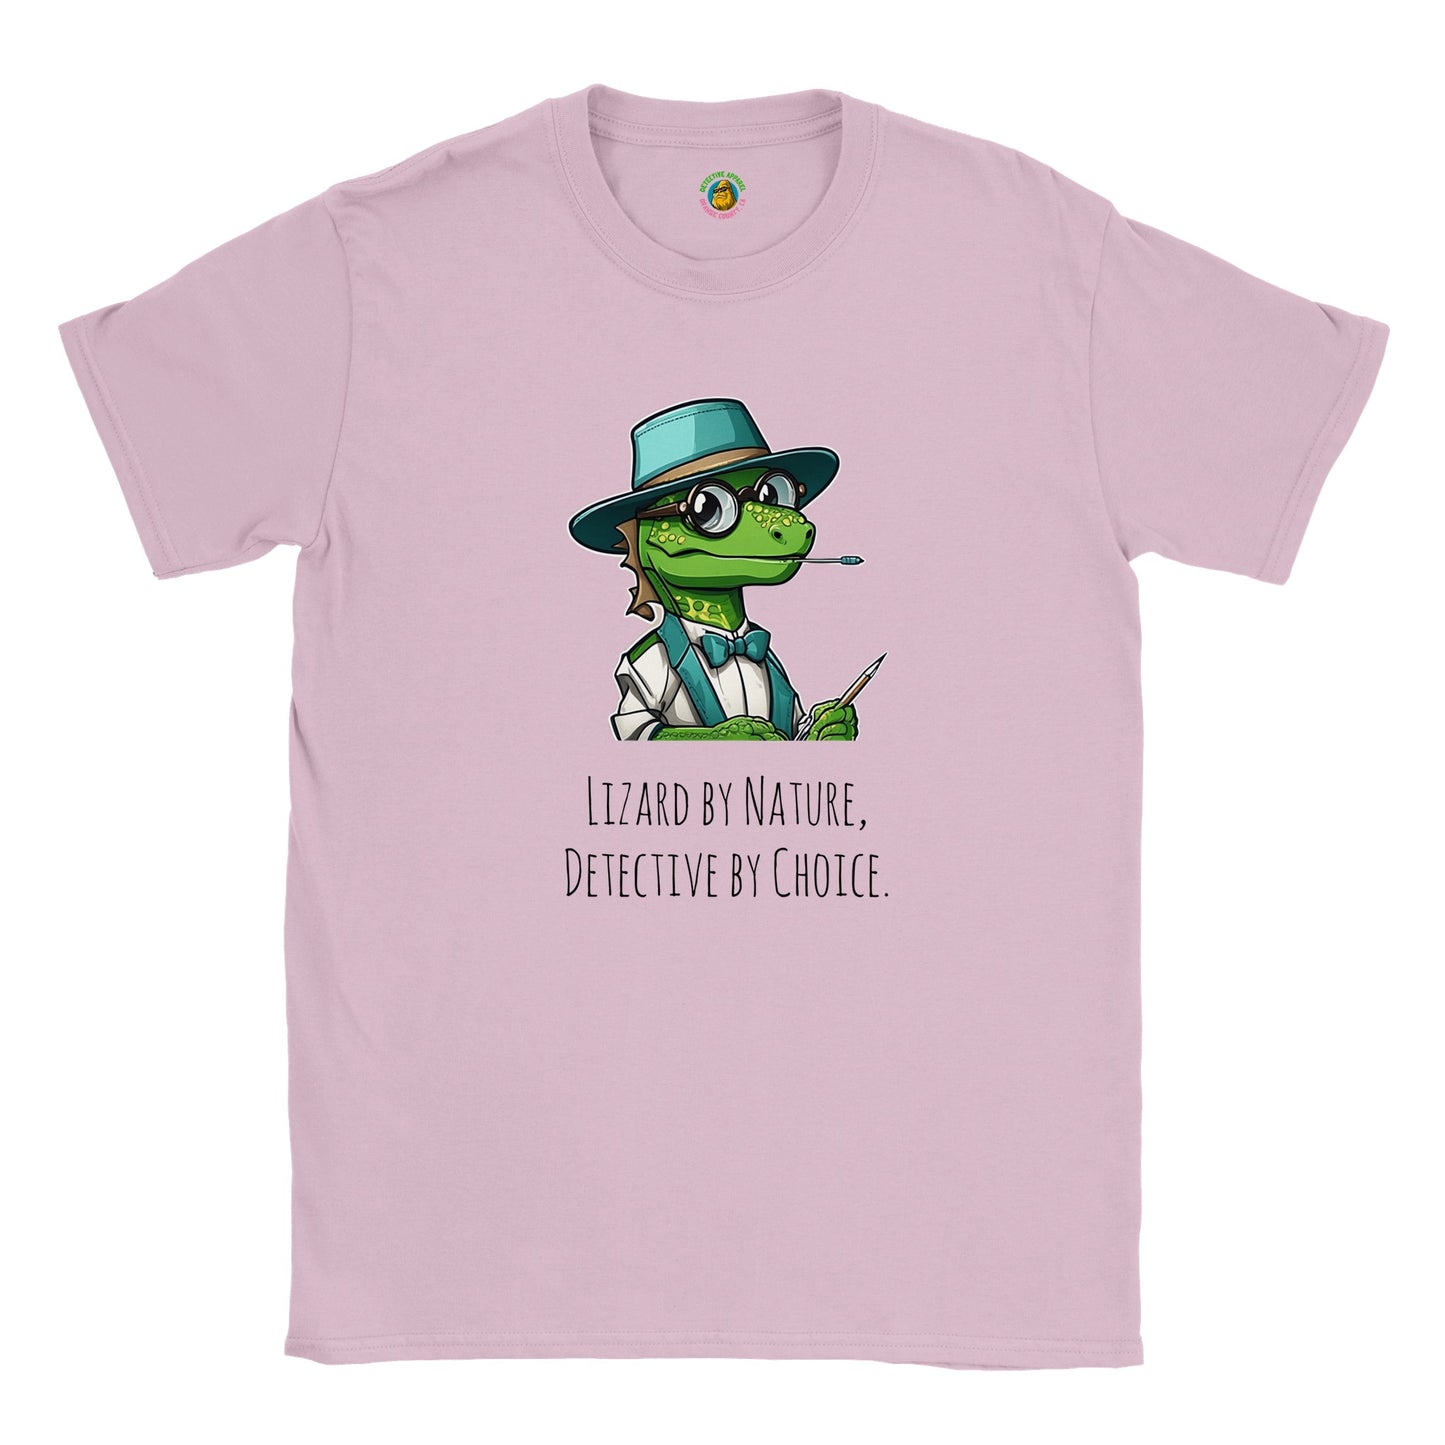 Classic Kids Crewneck T-shirt - Lizard By Nature, Detective By Choice.